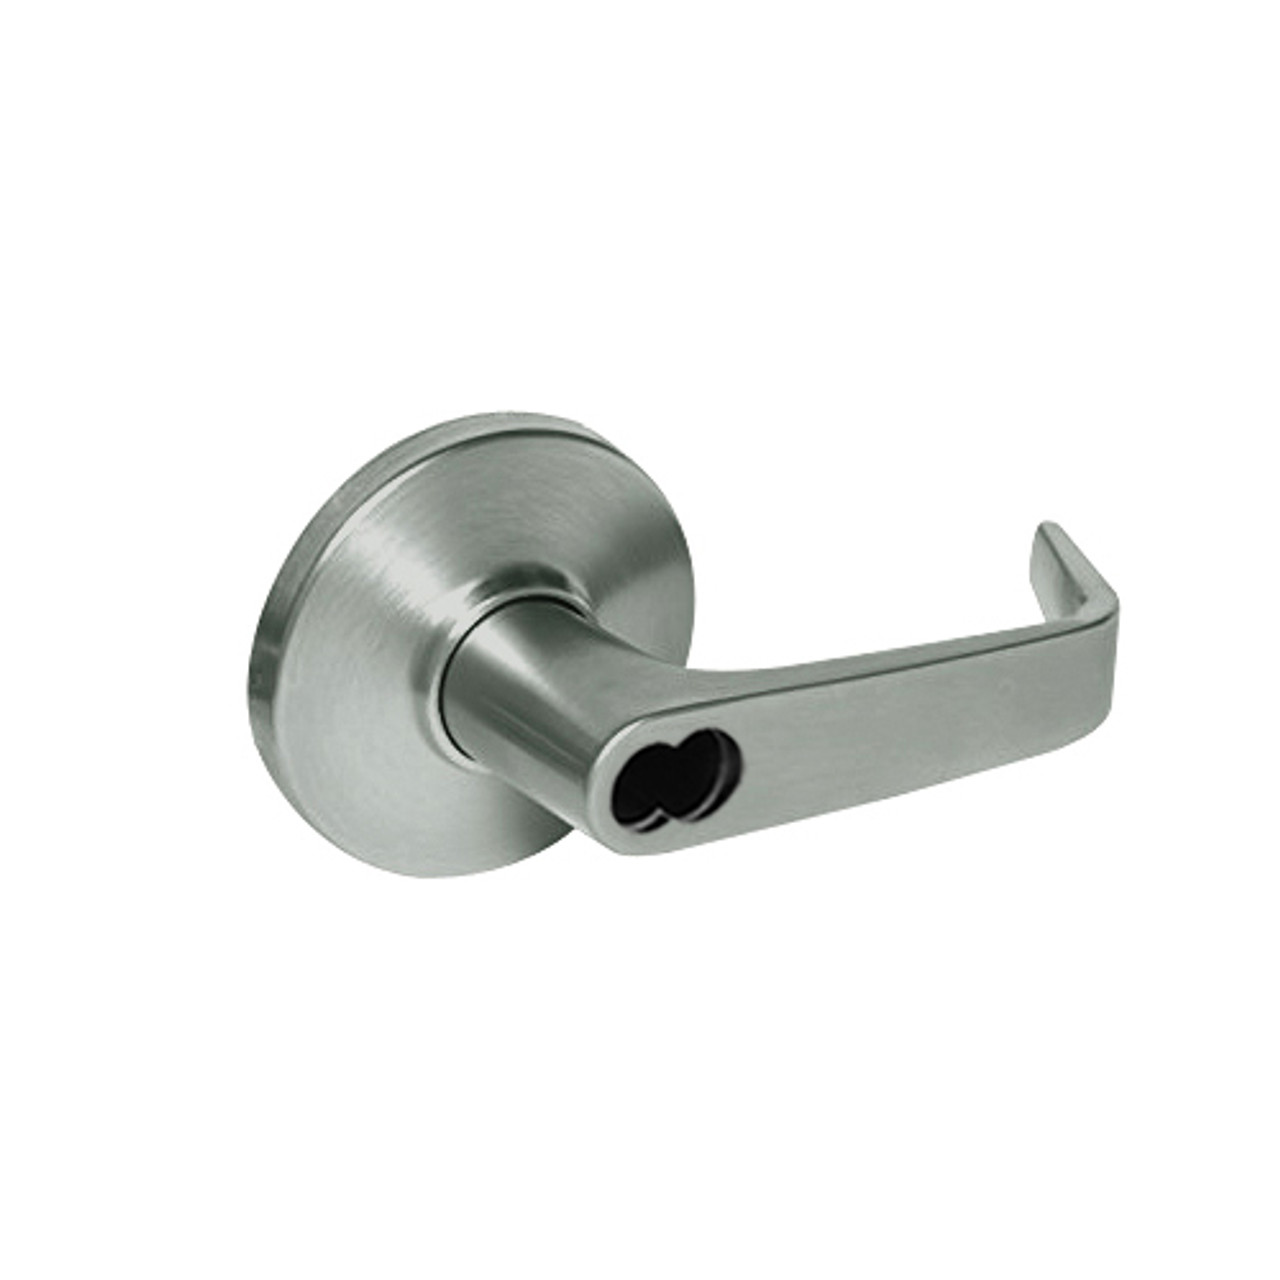 9K37XR15DS3619 Best 9K Series Special Function Cylindrical Lever Locks with Contour Angle with Return Lever Design Accept 7 Pin Best Core in Satin Nickel